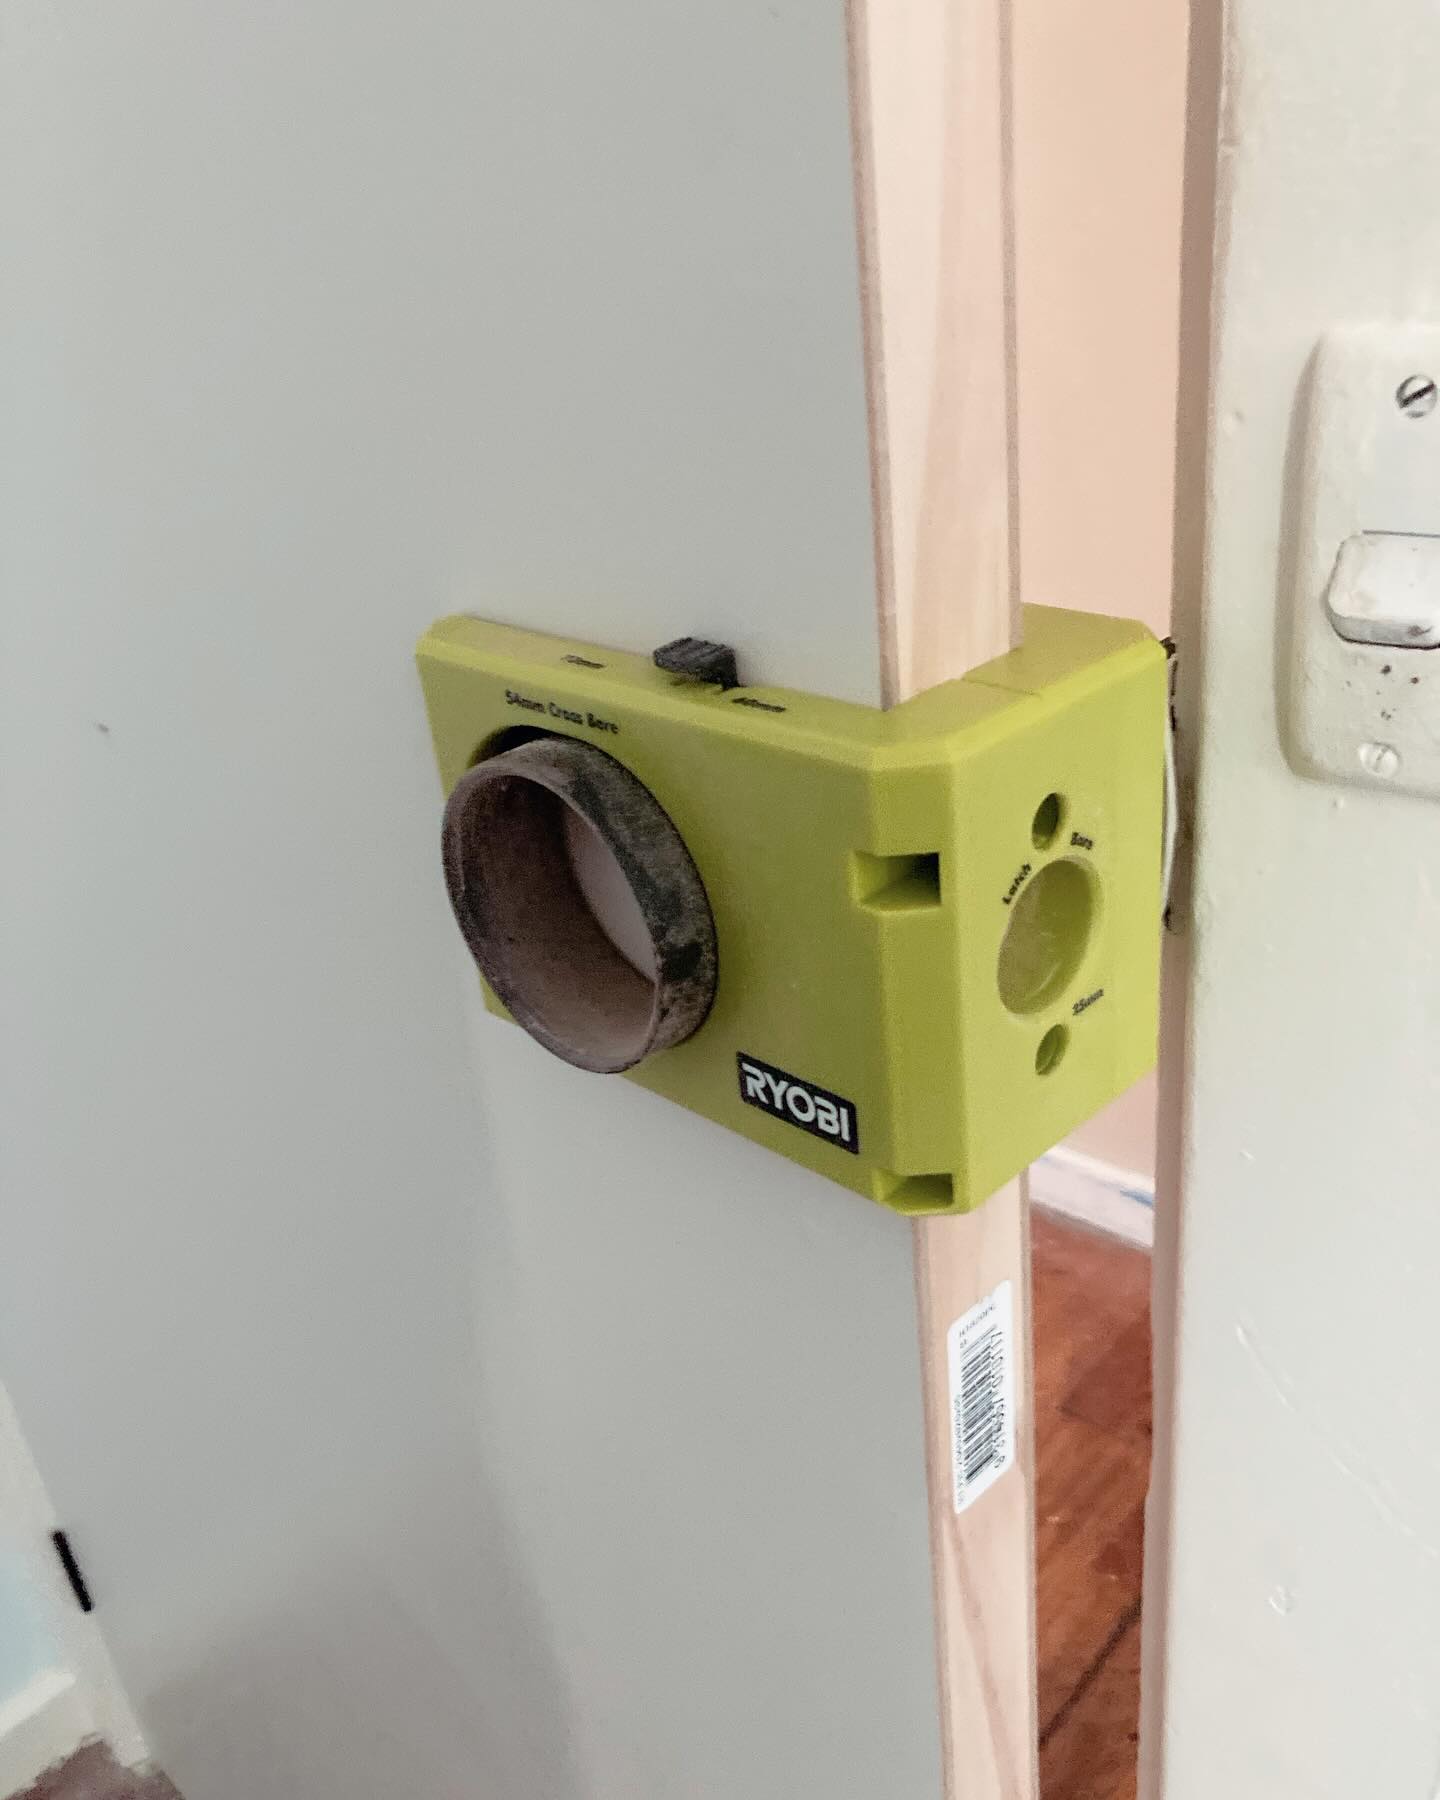 installation of door handles made easy with the ryobiau door jig from Bunnings and my boschtoolsanz  dills. It comes with everything needed to lineup and drill the holes needed for internal doors. #diy #powerhaus #ryobi #boschprofessional